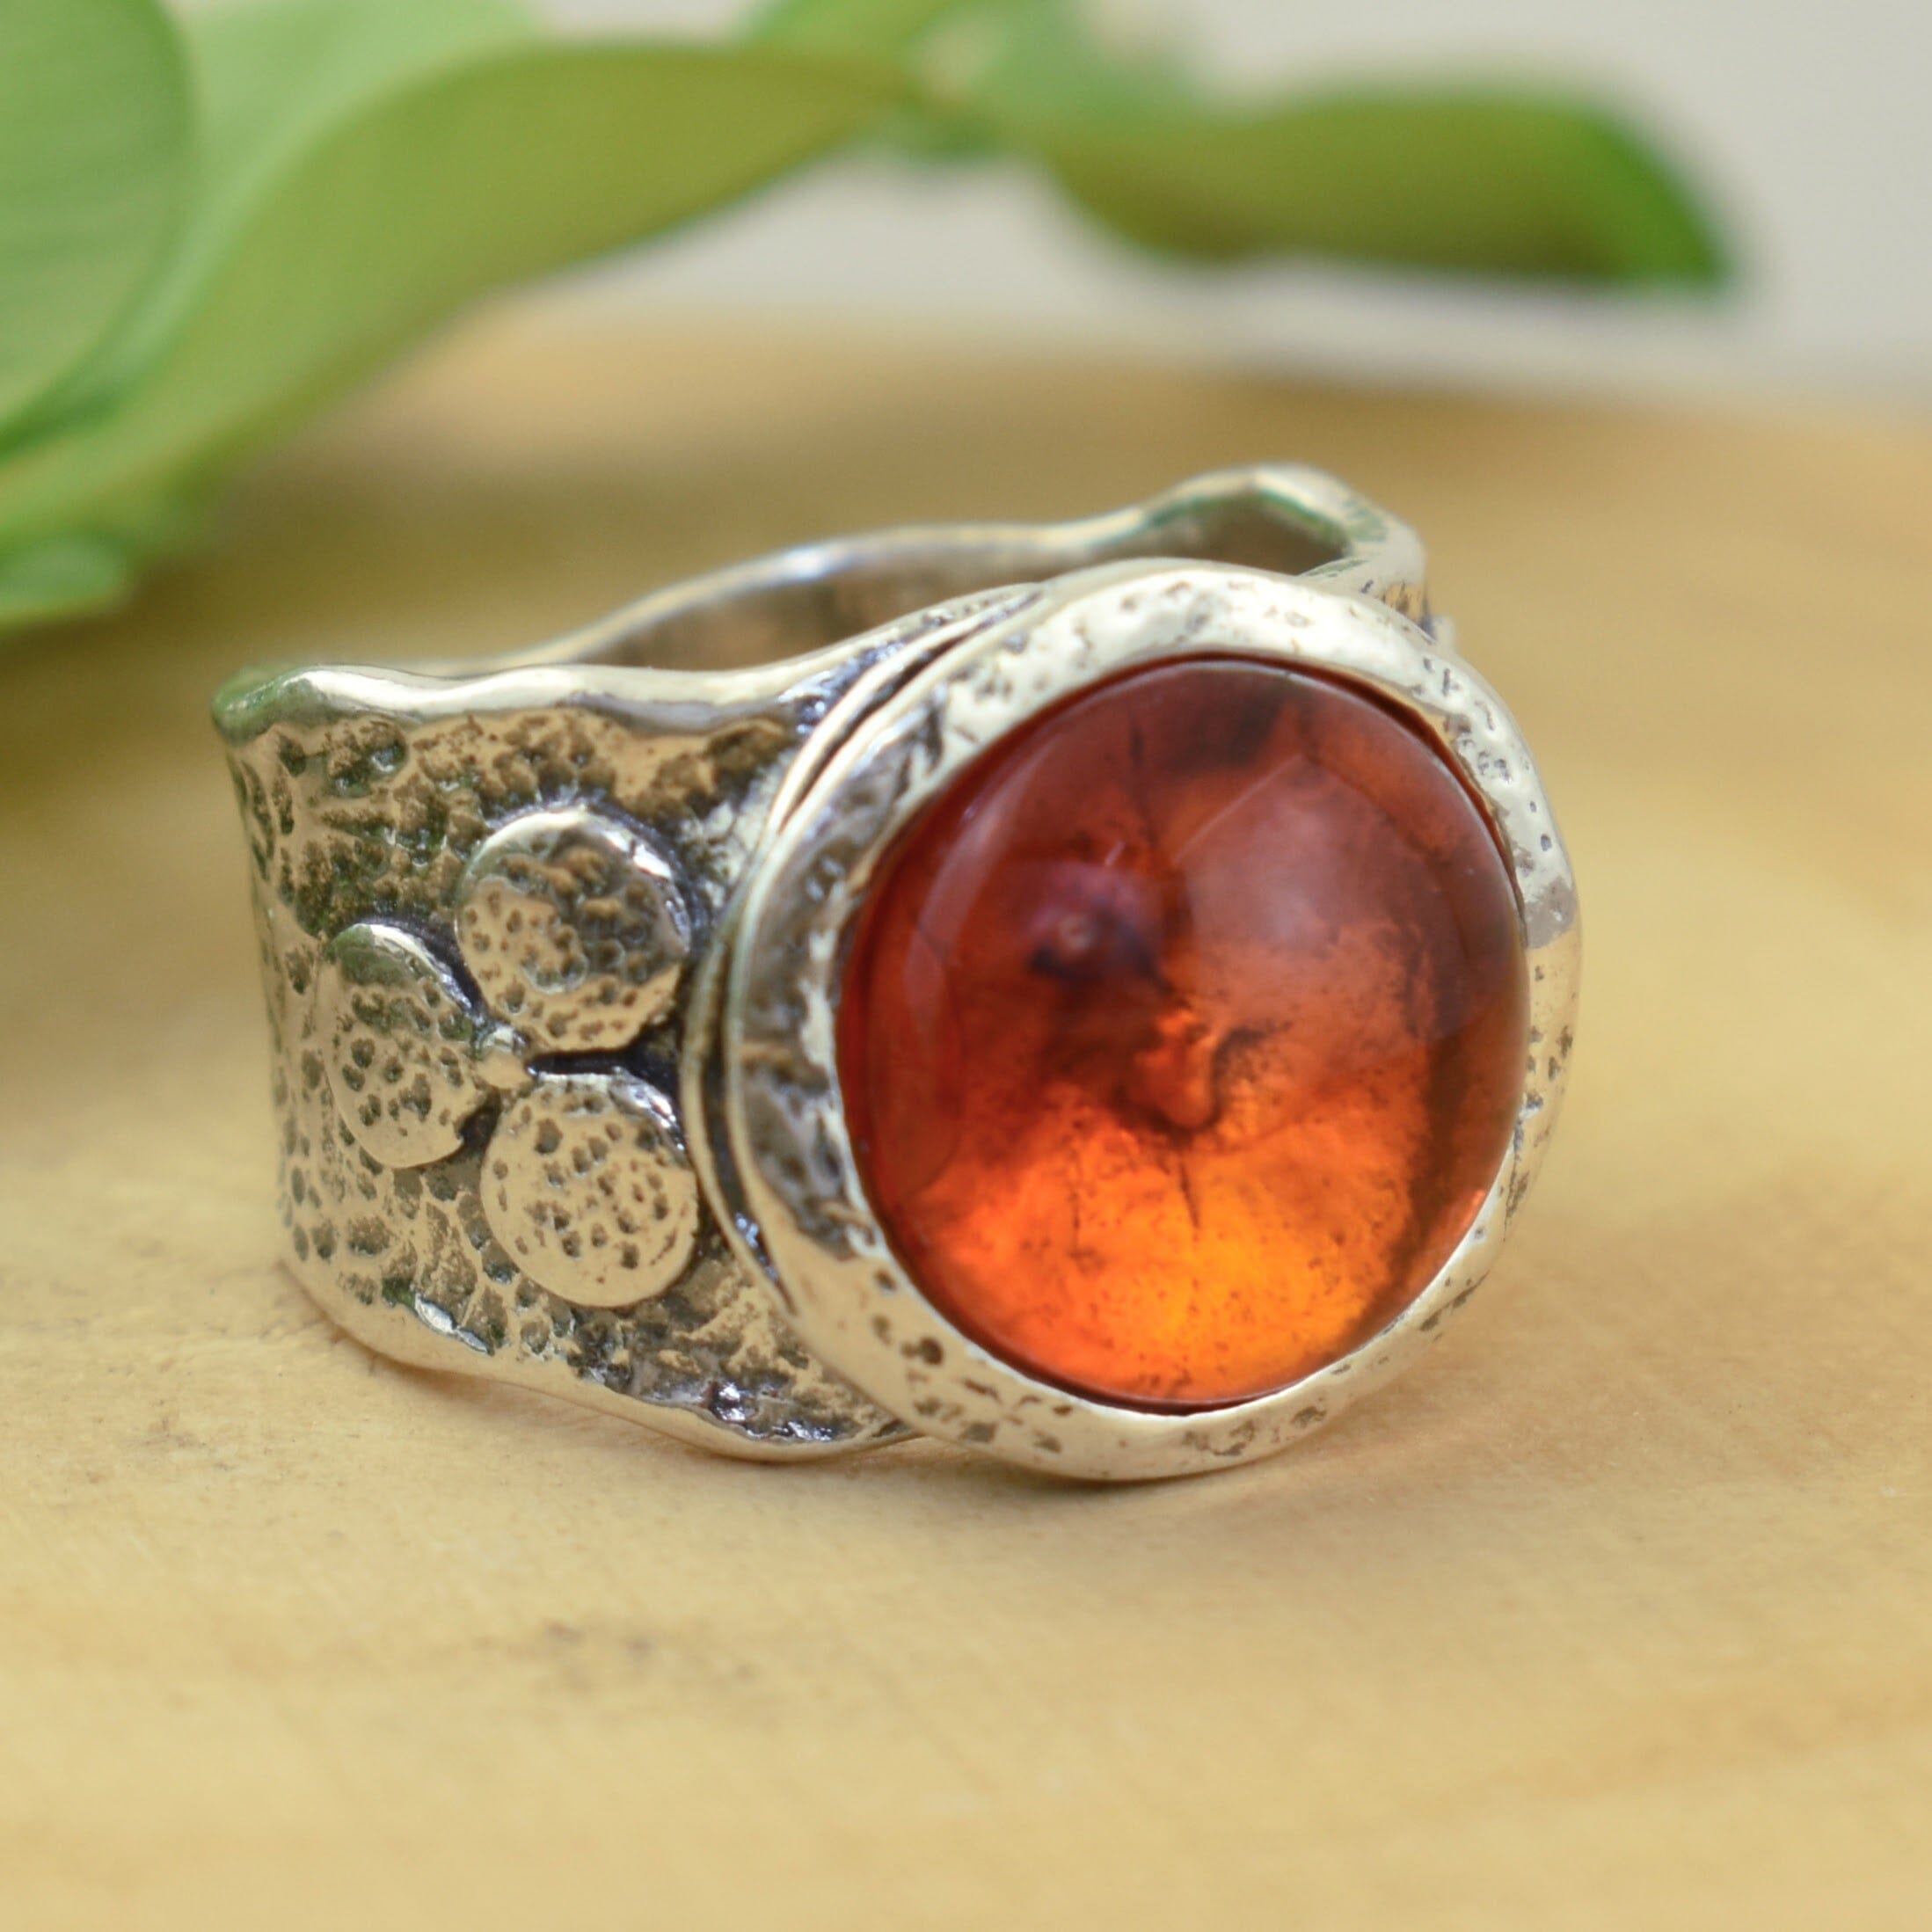 Handcrafted sterling silver ring with round synthetic amber stone